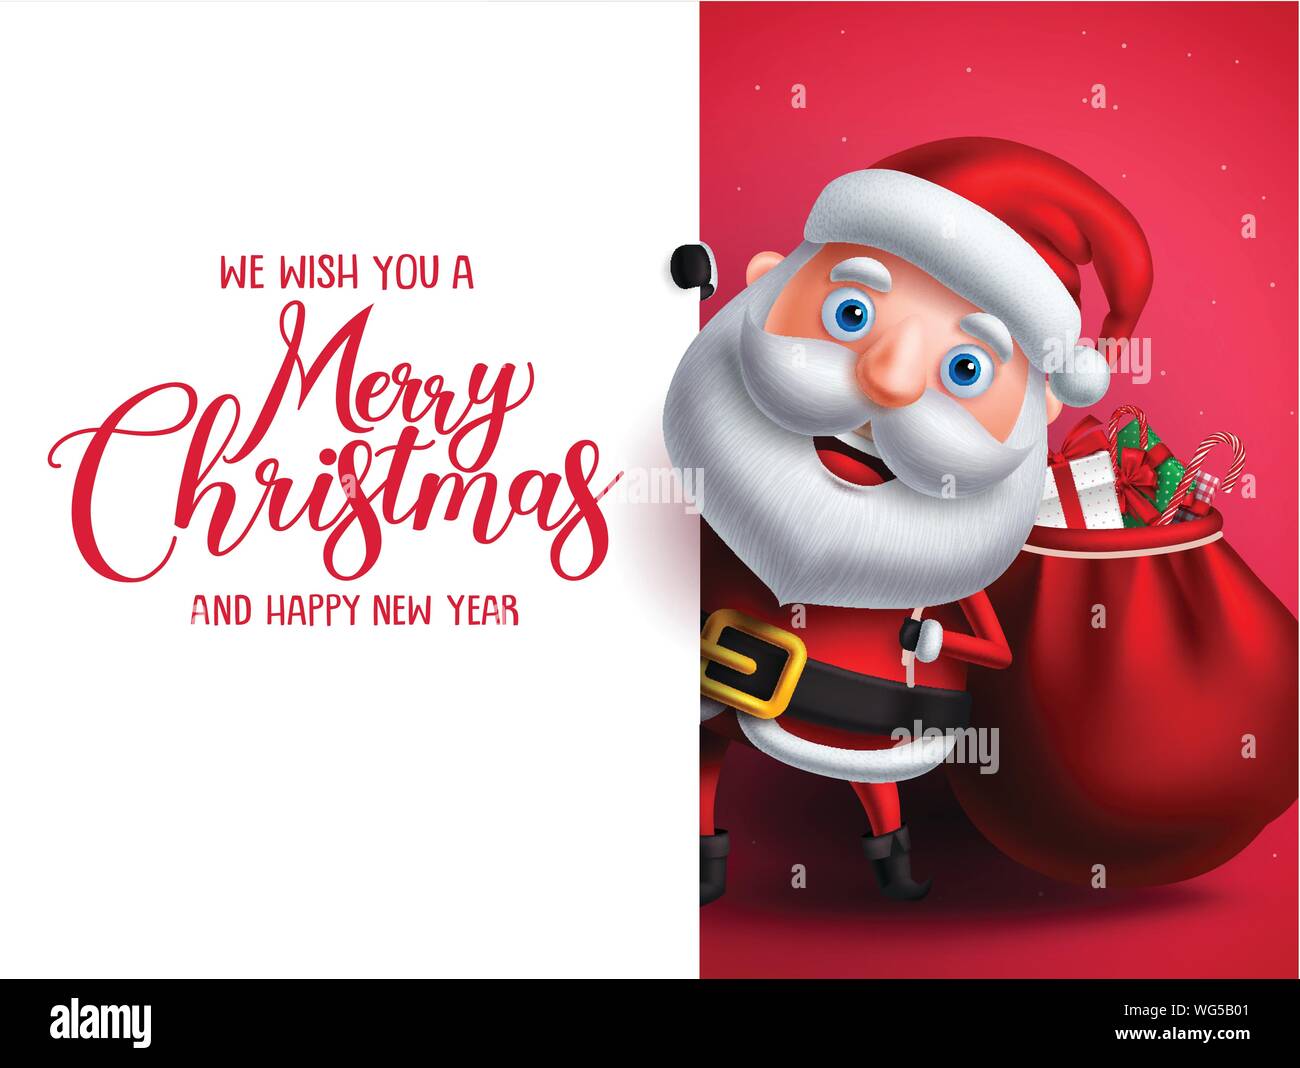 Santa claus vector character holding gifts with merry christmas ...